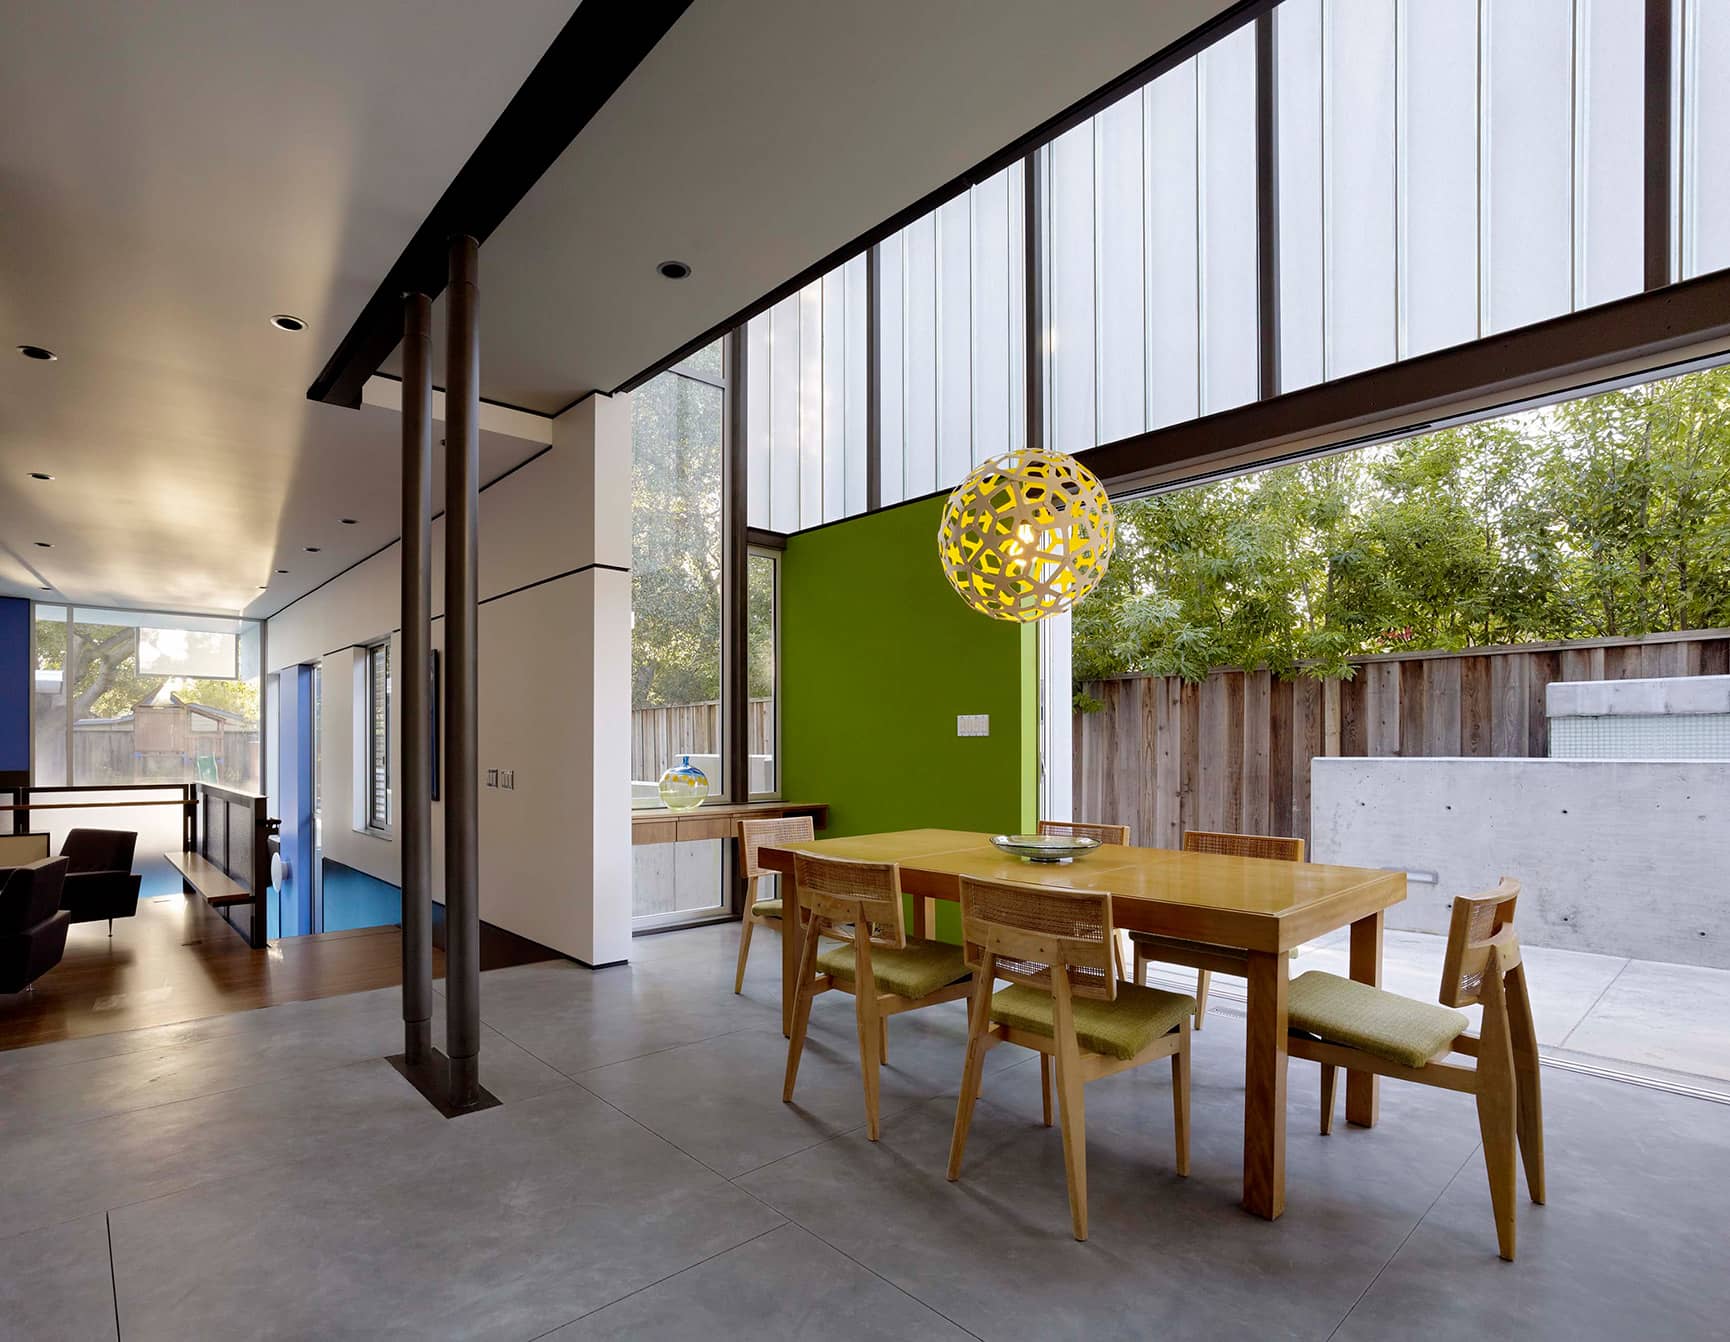 Mid-century modern home with high ceilings and dining area near large open doors.